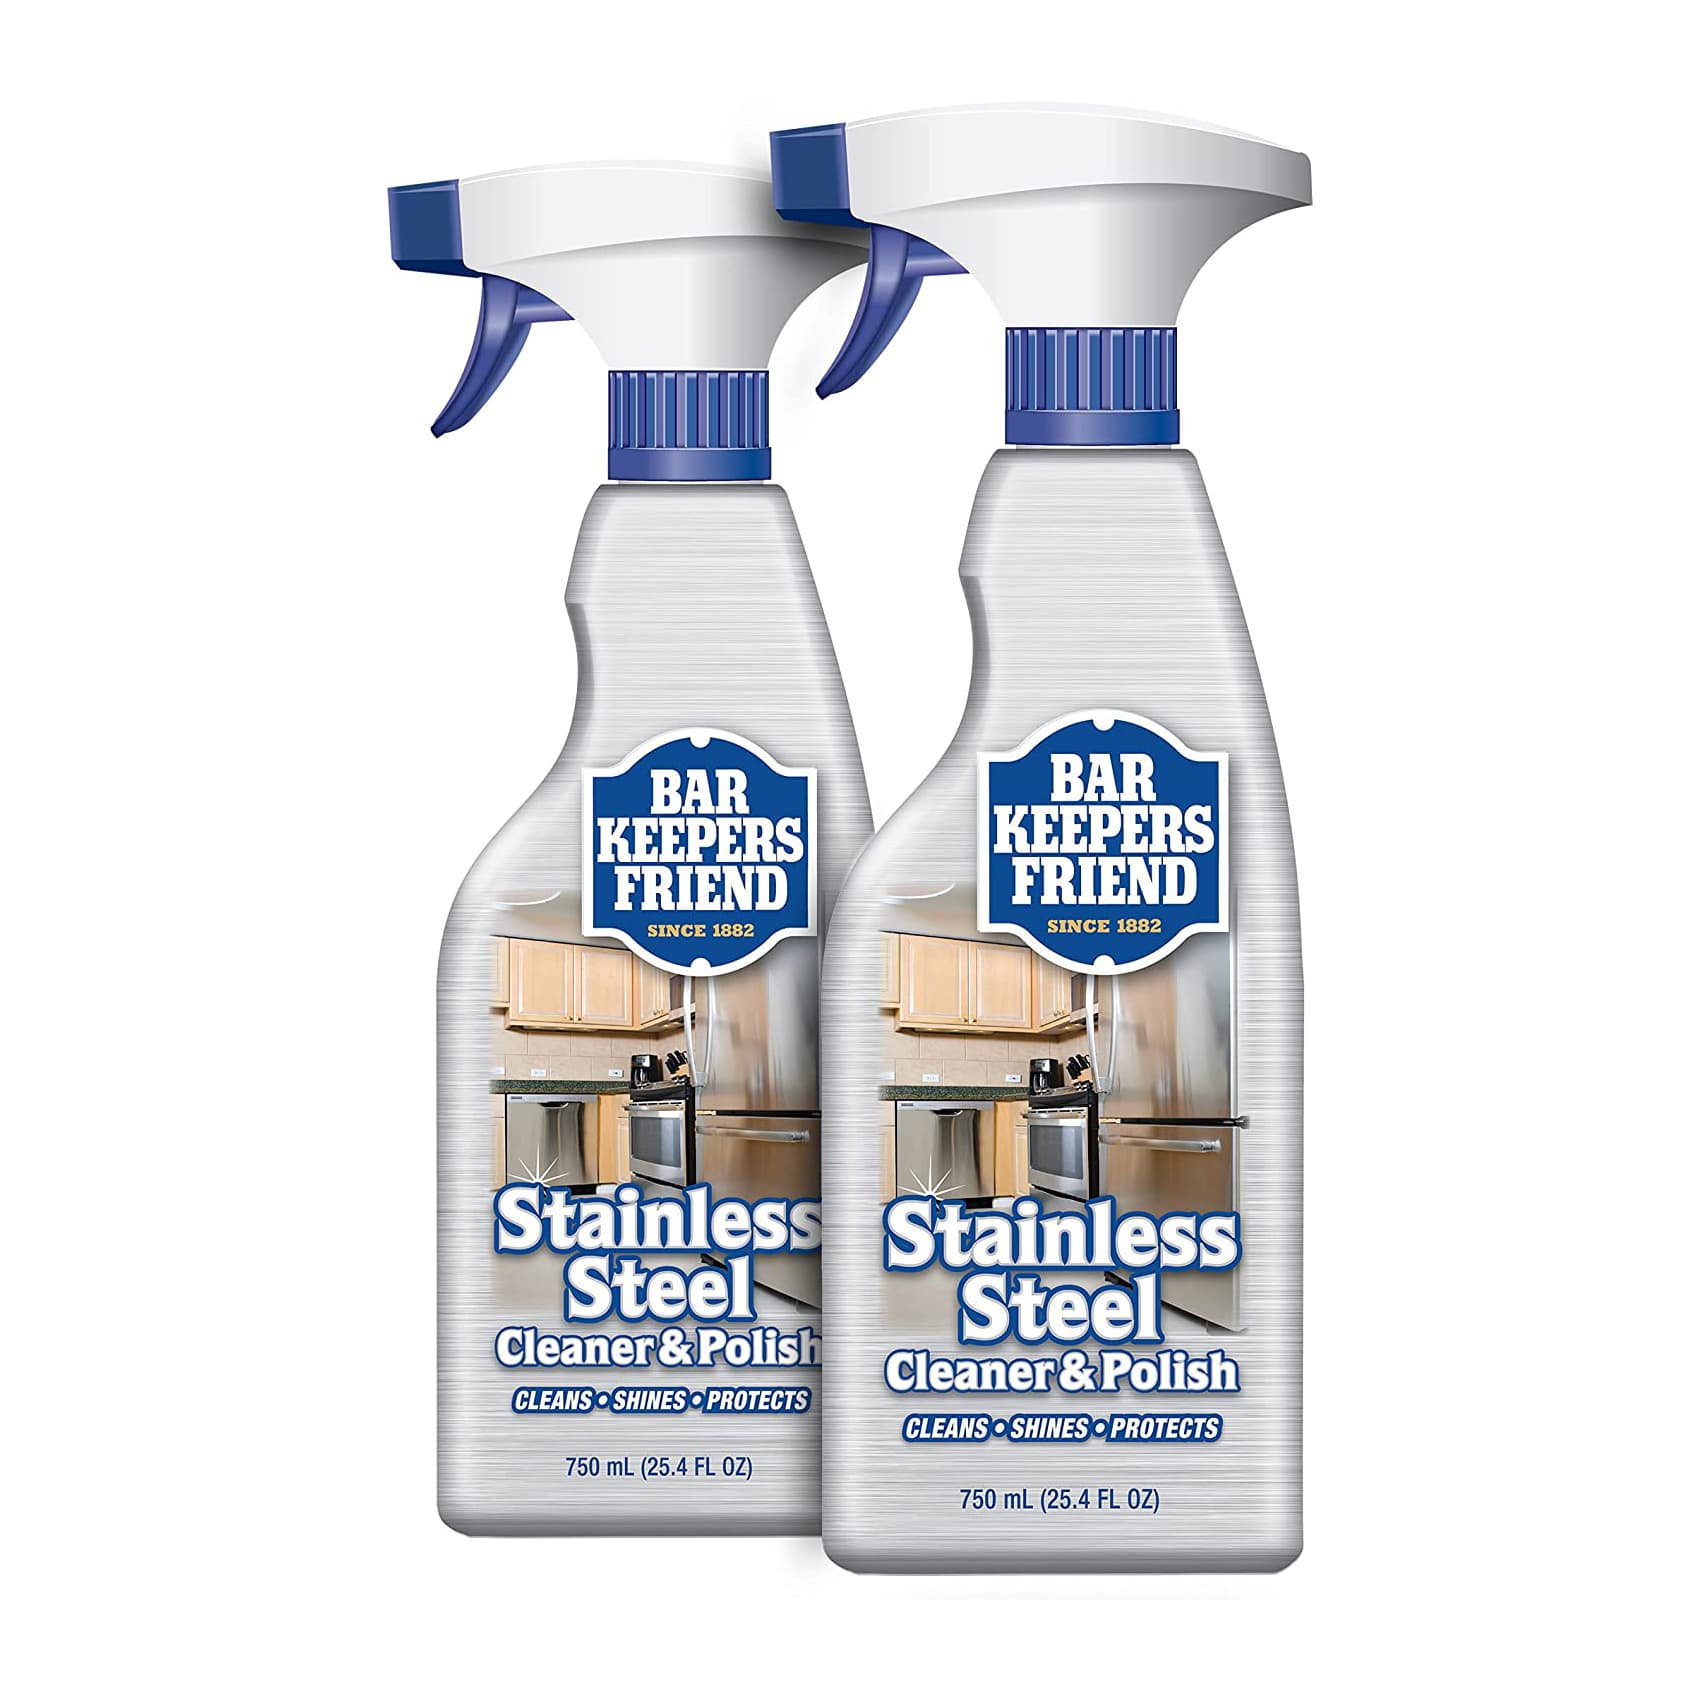 https://cdn.apartmenttherapy.info/image/upload/v1626901470/gen-workflow/product-database/bar-keepers-friend-stainless-steel-spray.jpg